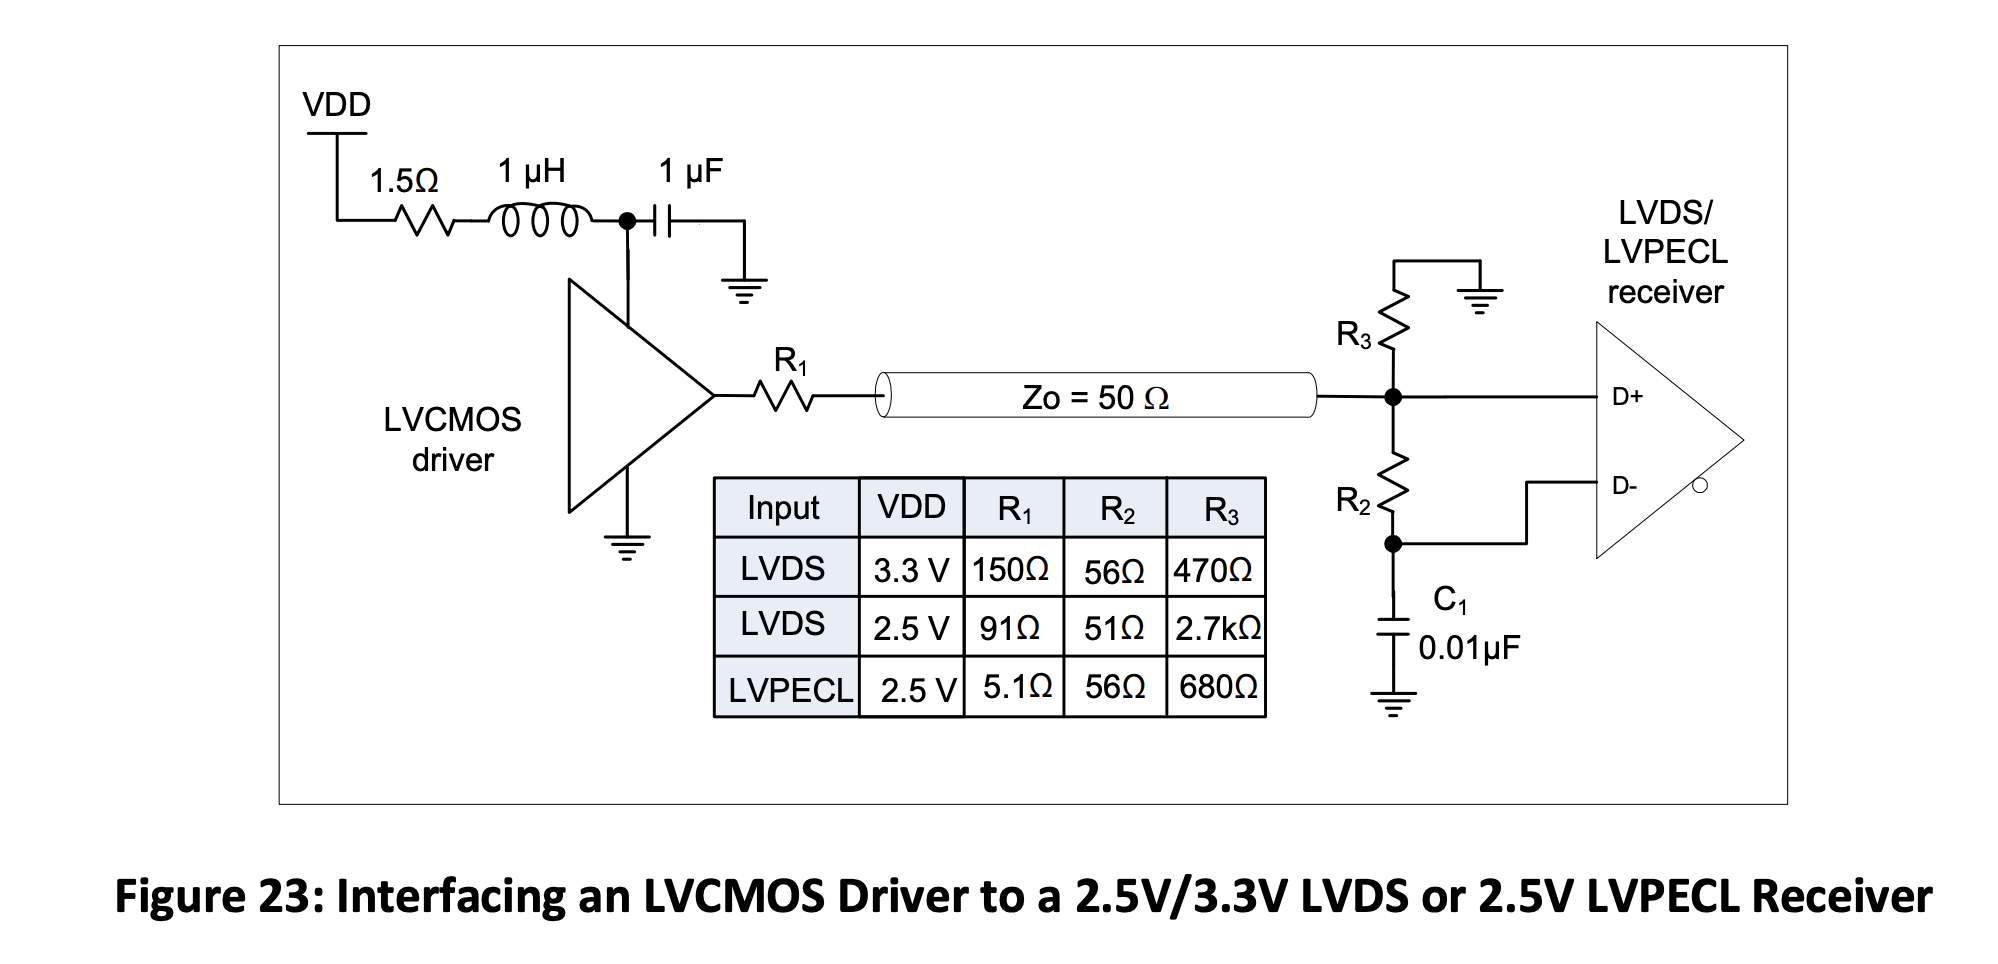 Figure 23 Interfacing an LVCMOS Driver to a 2.5V 3.3V LVDS or 2.5V LVPECL Receiver